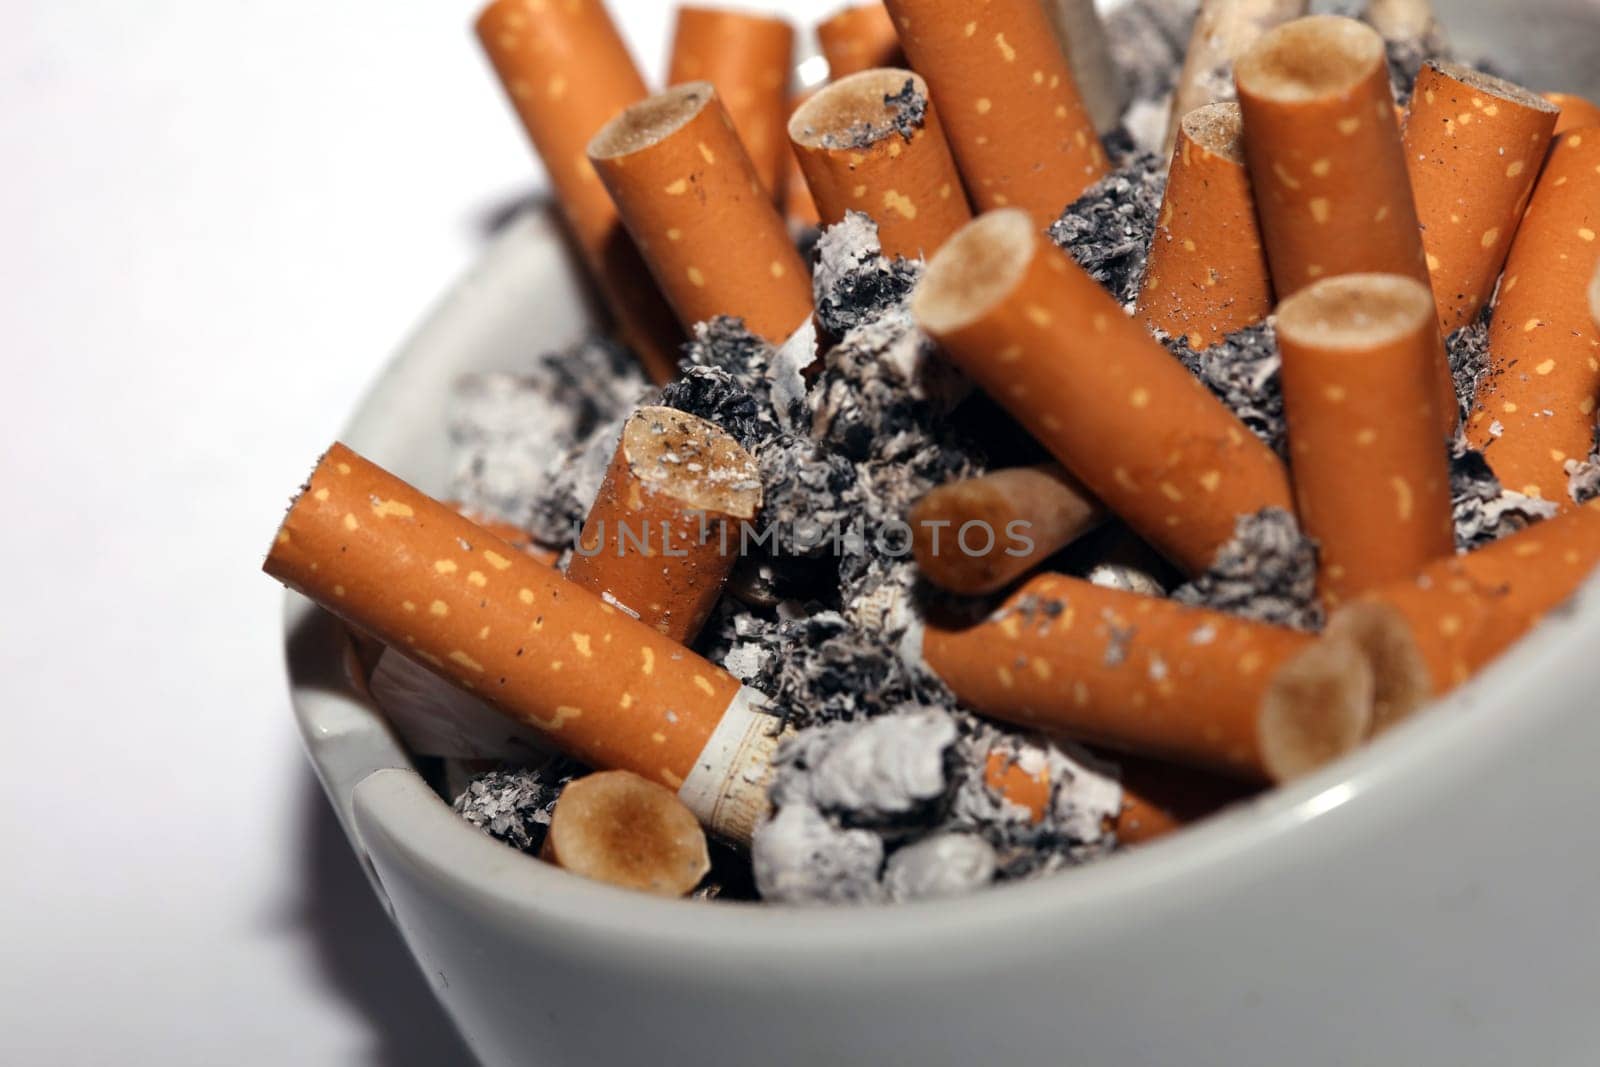 Full ashtray of cigarettes close up macro view smoking habits hi-res stock photography and images high quality big size instant download by BakalaeroZz